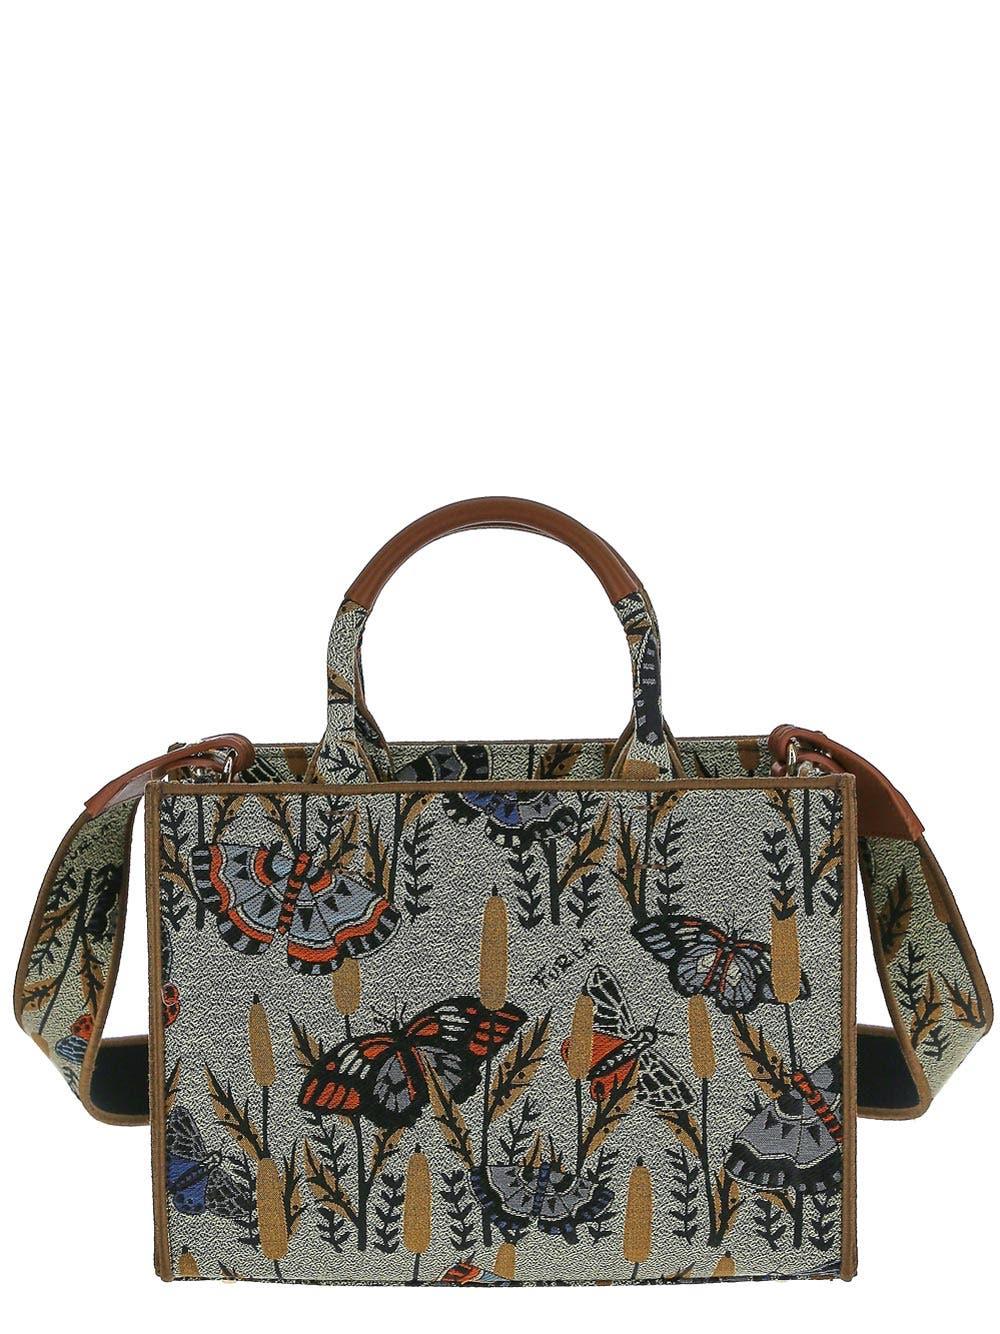 Furla Butterfly Tote Bag in Natural | Lyst